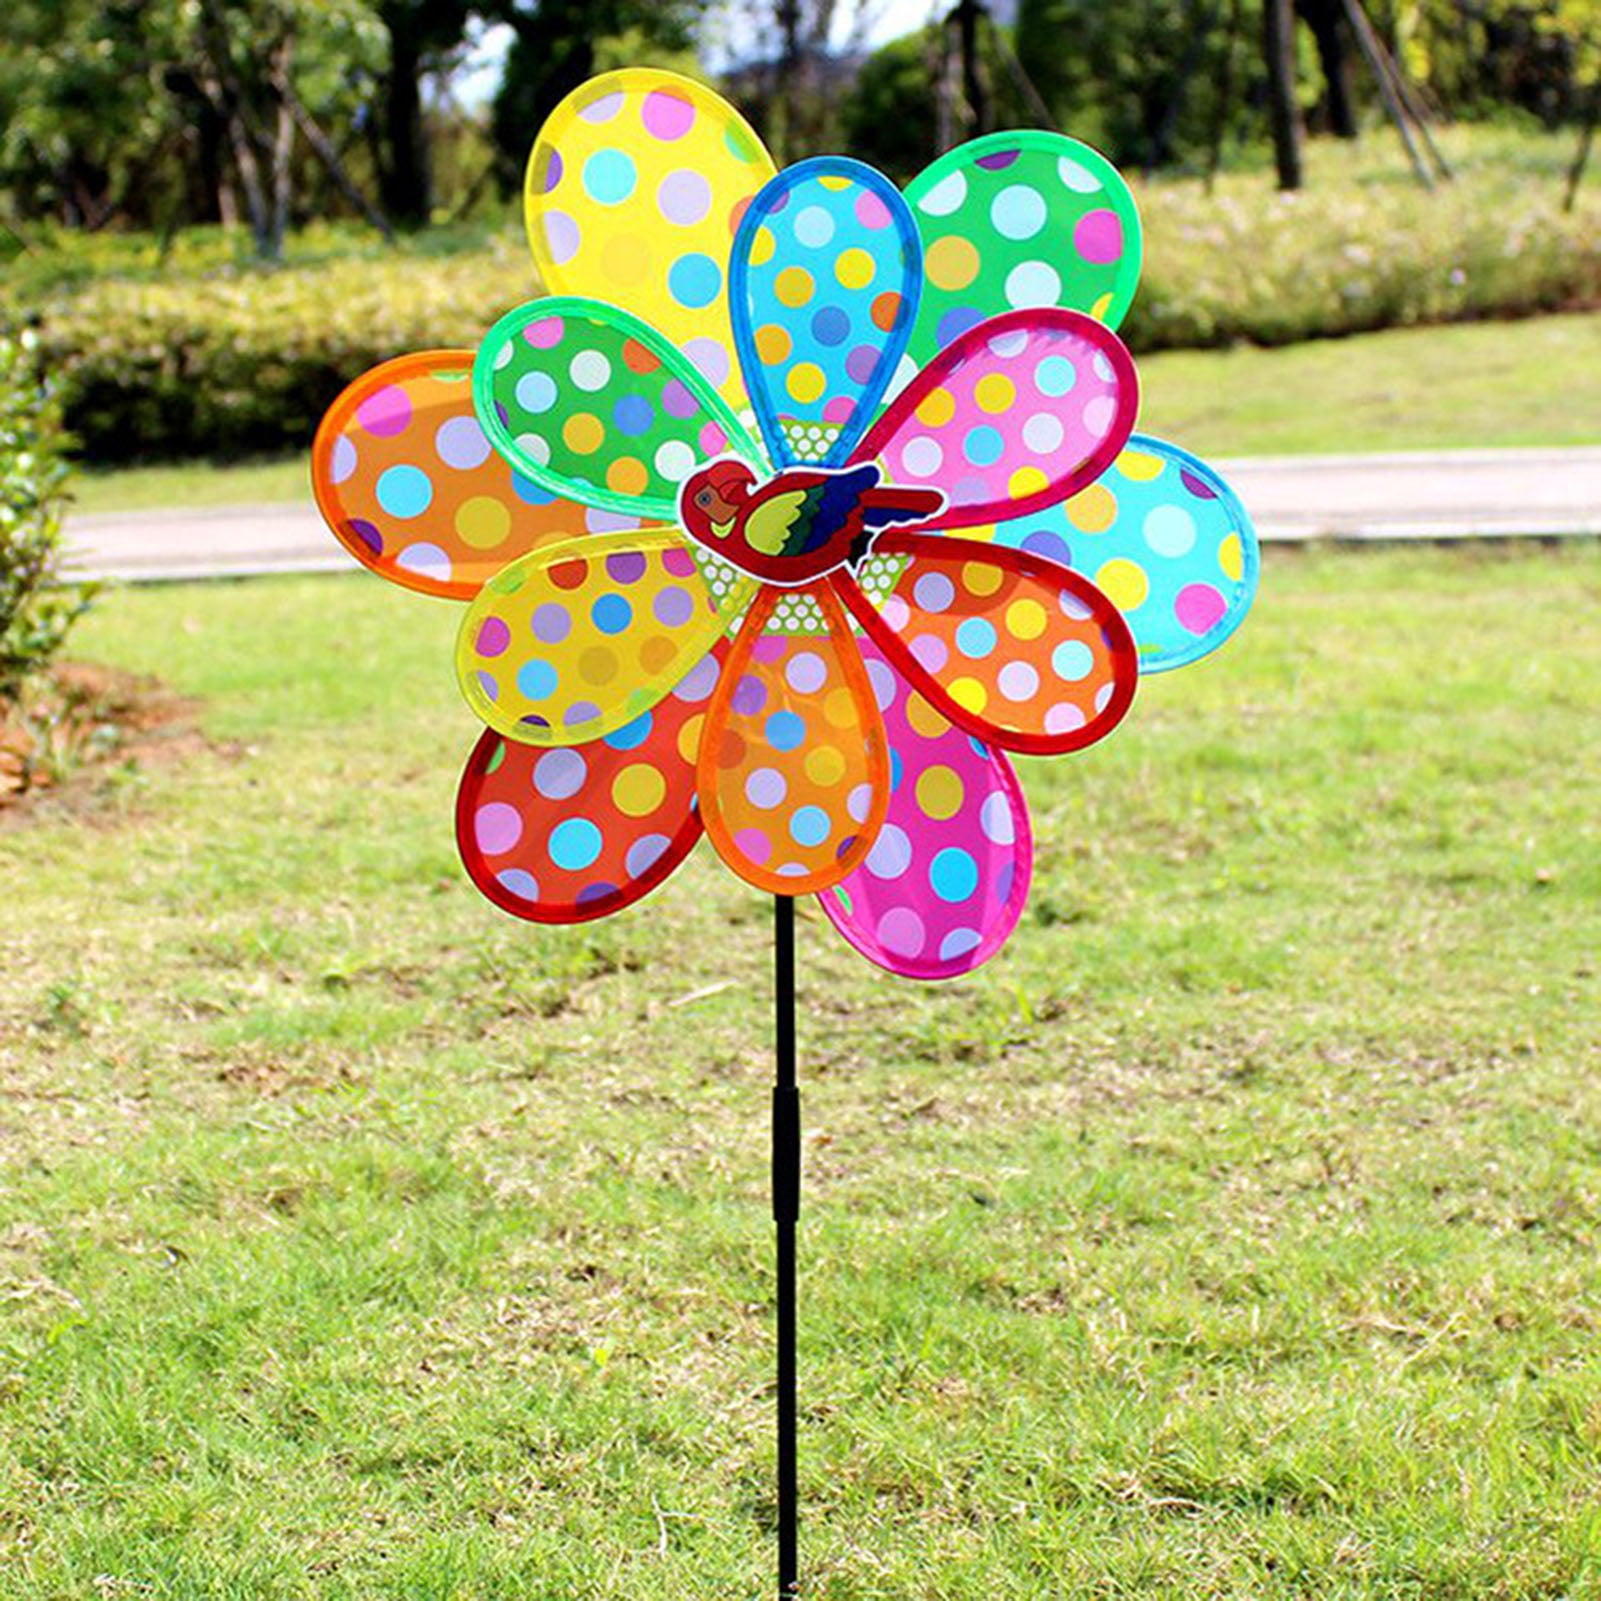 Techinal Double Layer Windmill Wind Spinner Sequins Whirligig Wheel For Yard Garden Party Decoration Kids Children Toys 